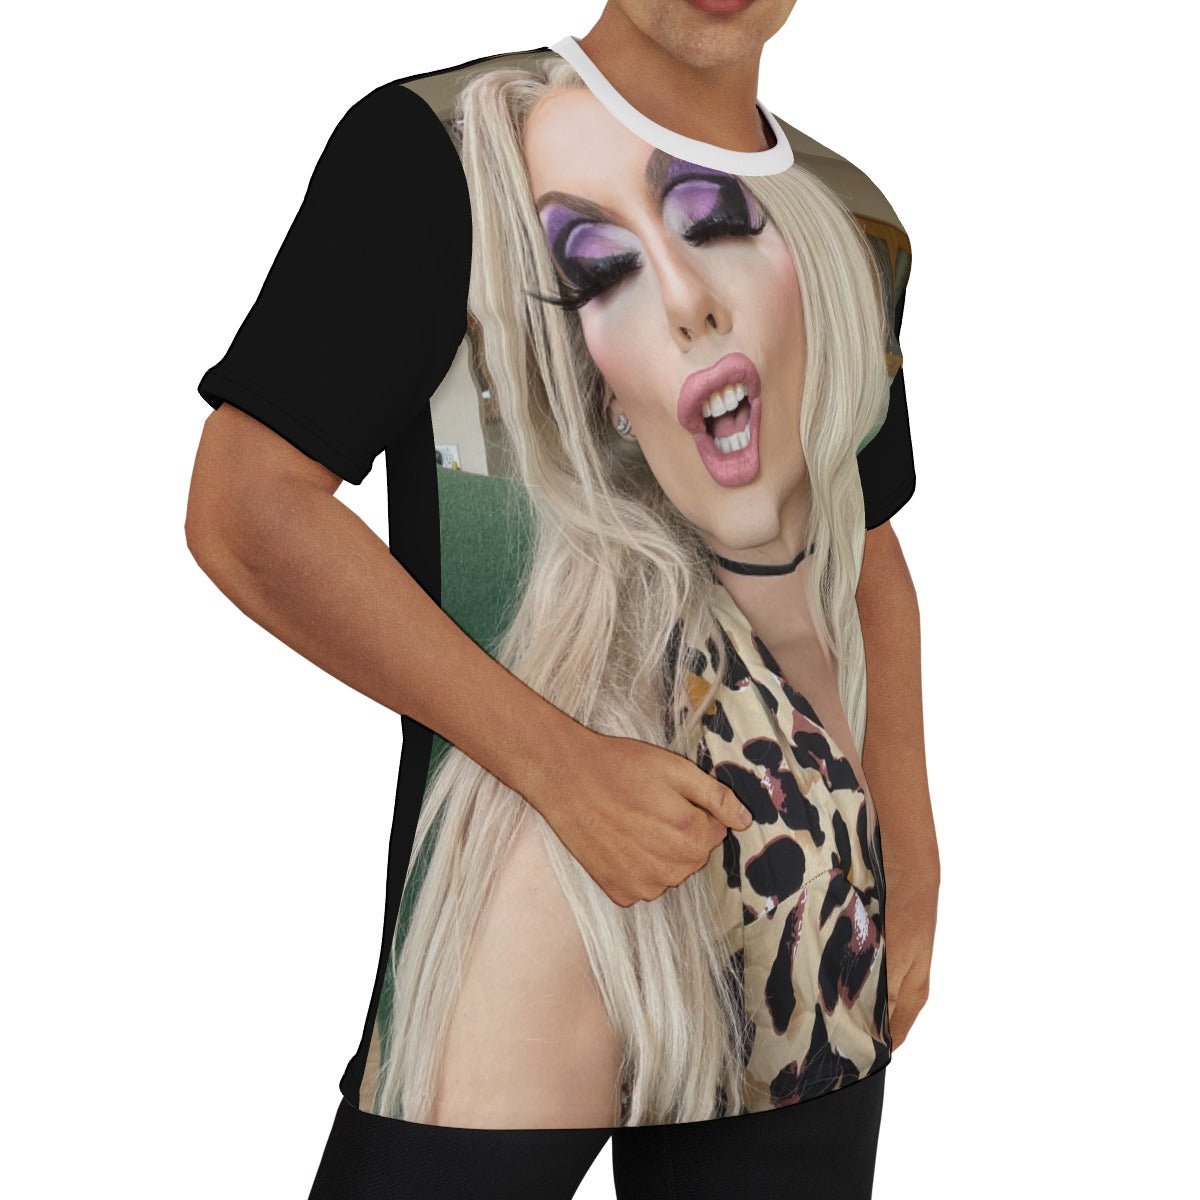 Alaska 5000 - Can You See Me All Over Print T-Shirt - dragqueenmerch